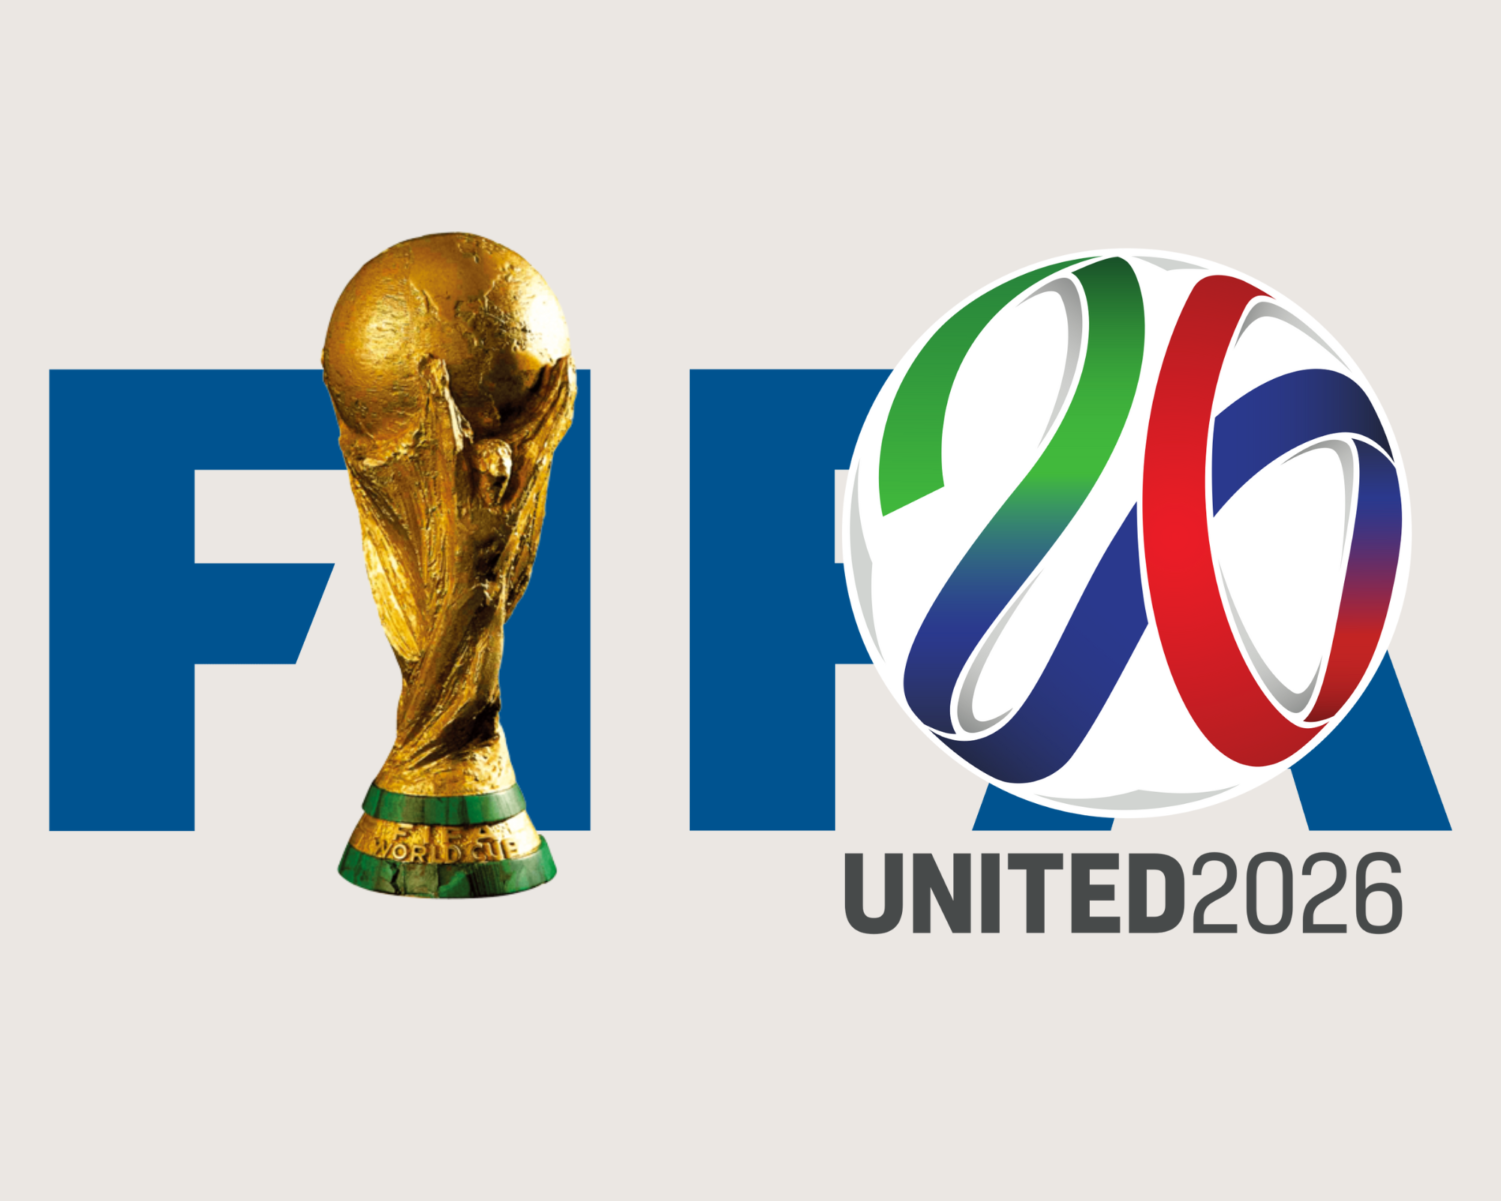 FIFA World Cup 2026: Big Reveal of Host Cities Is Coming Soon